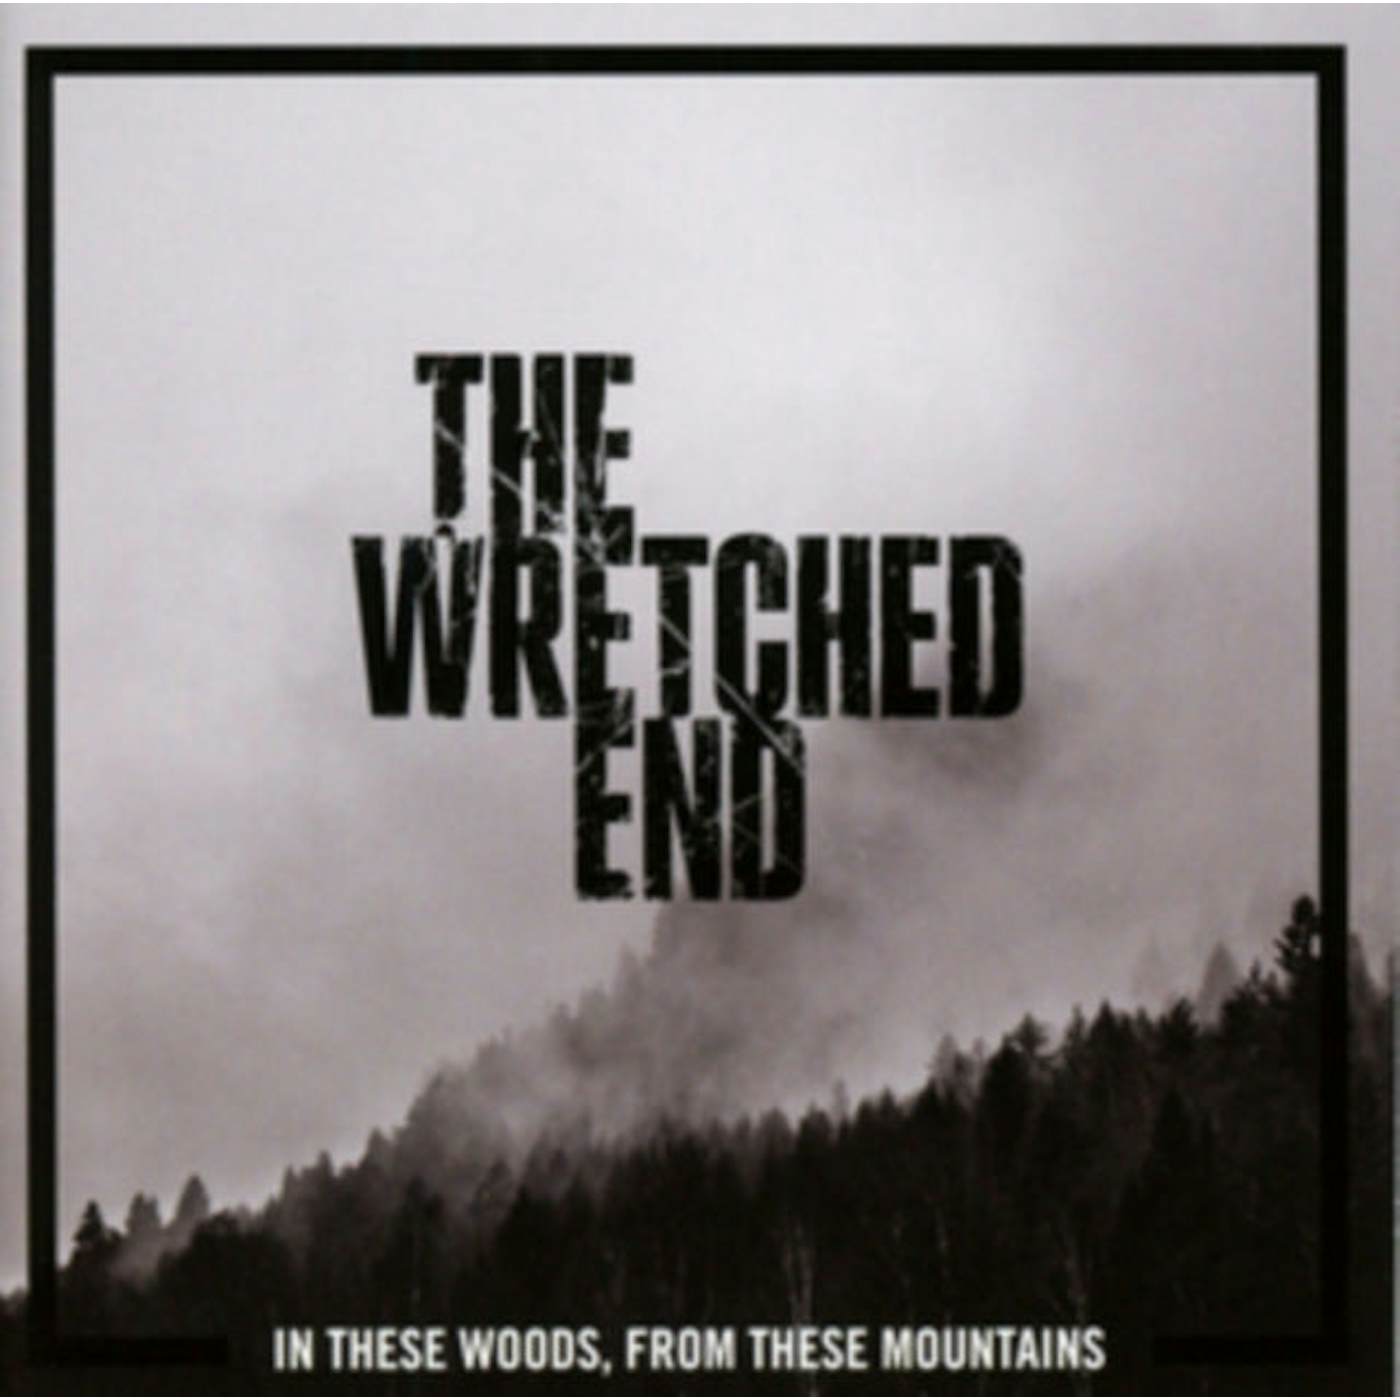 The Wretched End CD - In These Woods, From These Mountains